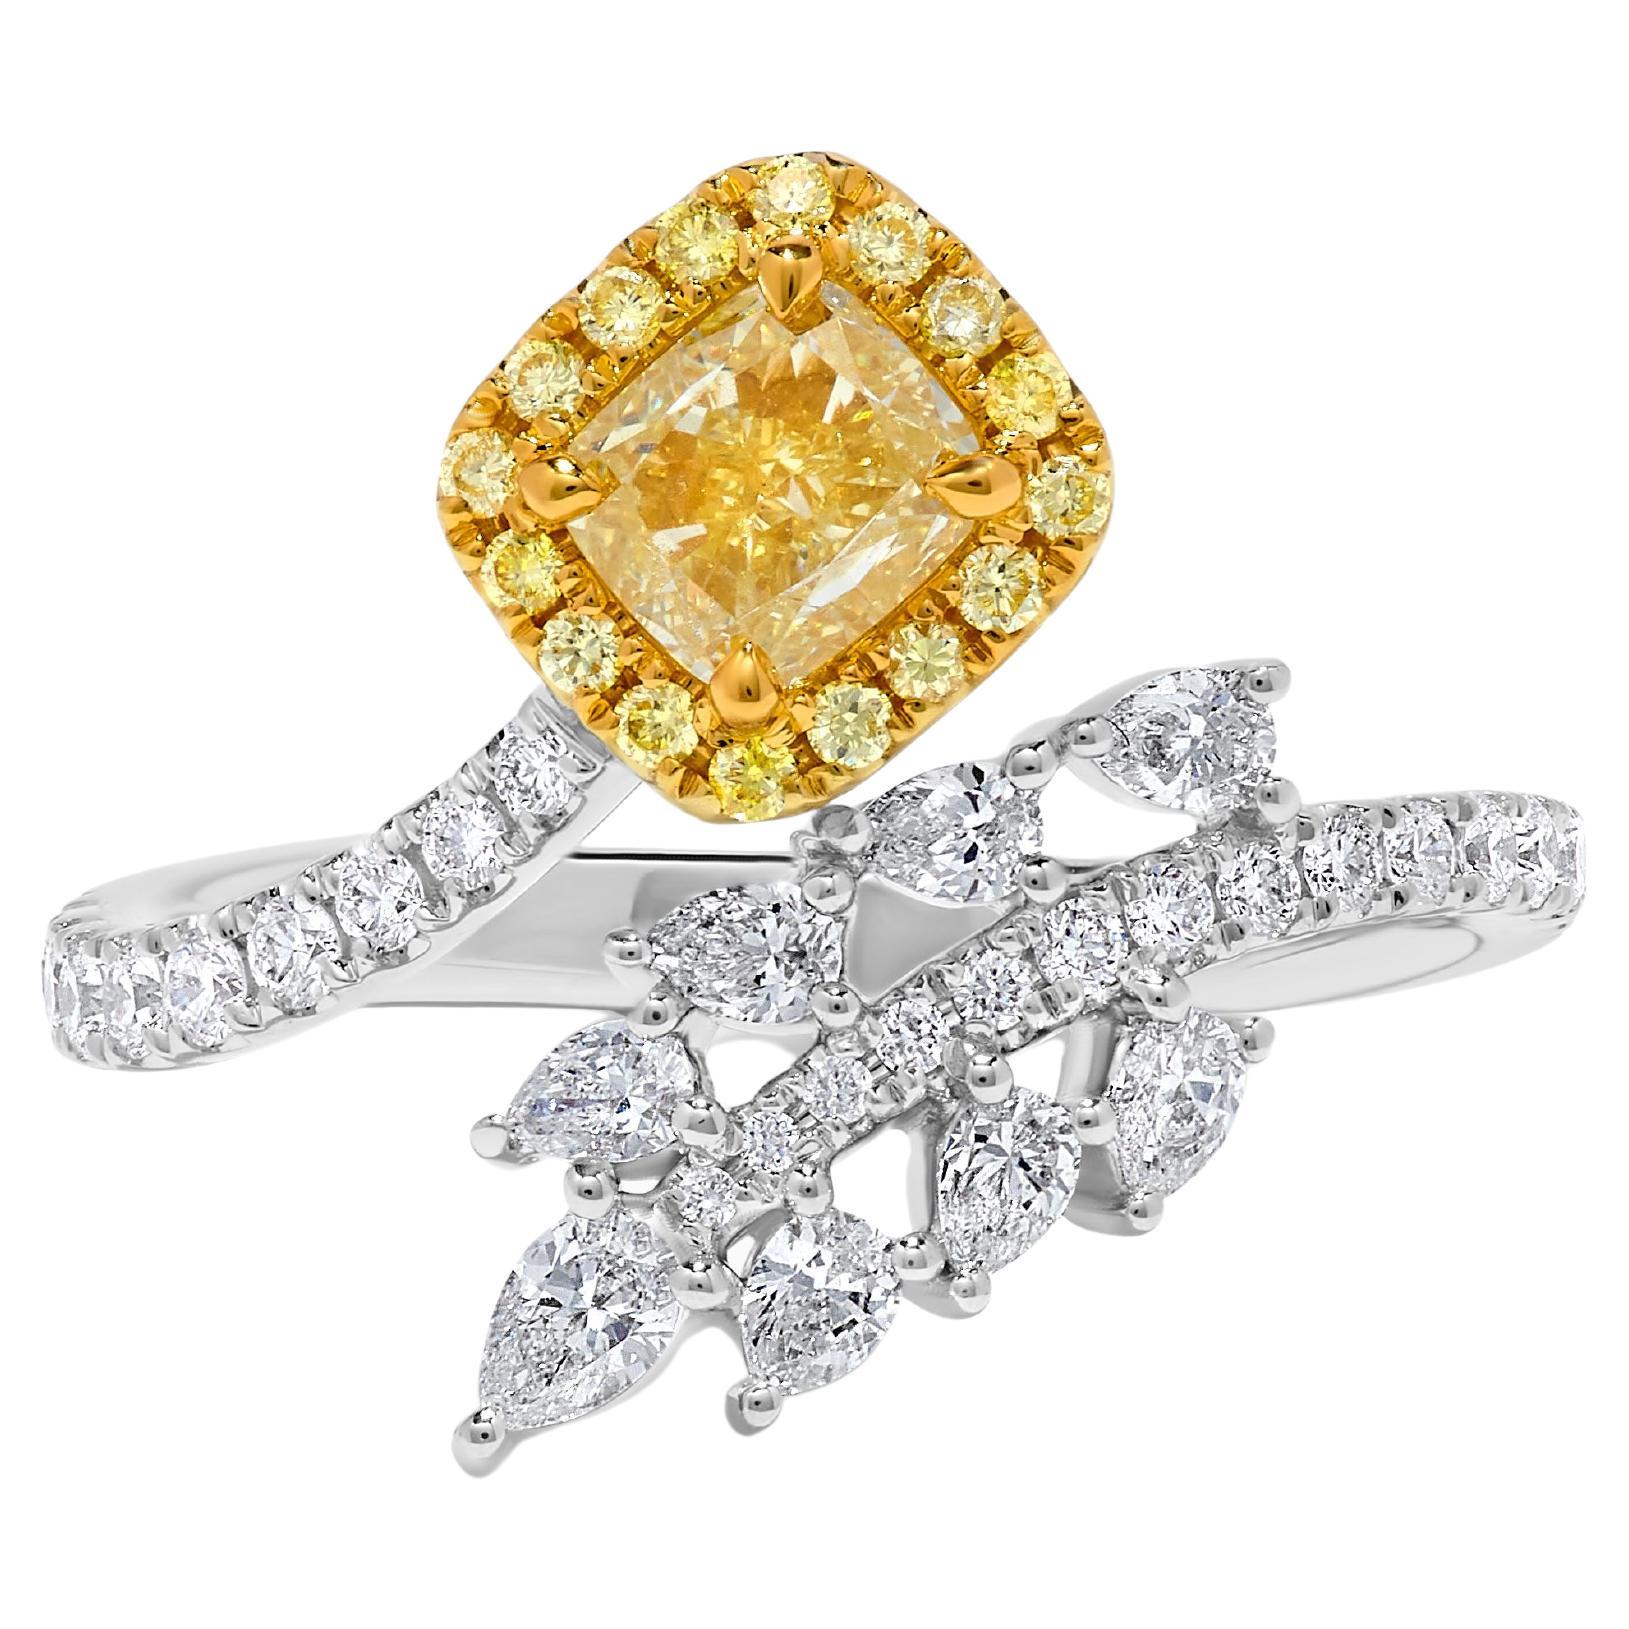 GIA Certified Natural Yellow Cushion Diamond 1.69 Carat TW Gold Cocktail Ring For Sale